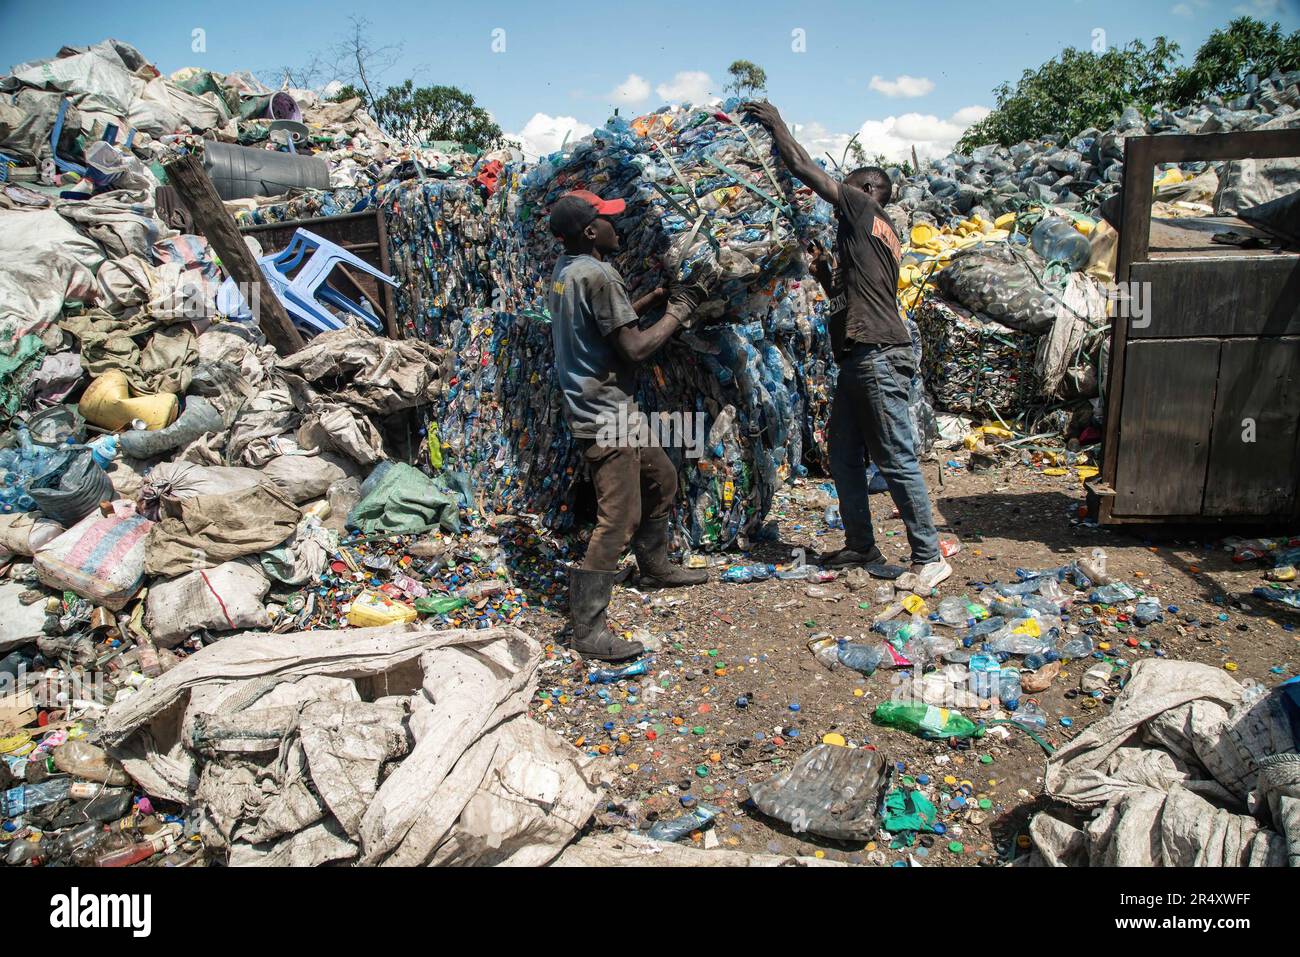 Workers move a bale of plastic bottles at a recycling plant in Nakuru. Negotiators have gathered in Paris, France for the second round of deliberations to develop a global treaty aimed at tackling the escalating issue of plastic pollution. According to a recent report by the United Nations Environment Programme (UNEP), countries have the potential to reduce plastic pollution by 80% by 2040 by eliminating unnecessary plastics, implementing recycling and reuse strategies, introducing deposit return schemes, and substituting plastic with sustainable alternative materials. Stock Photo